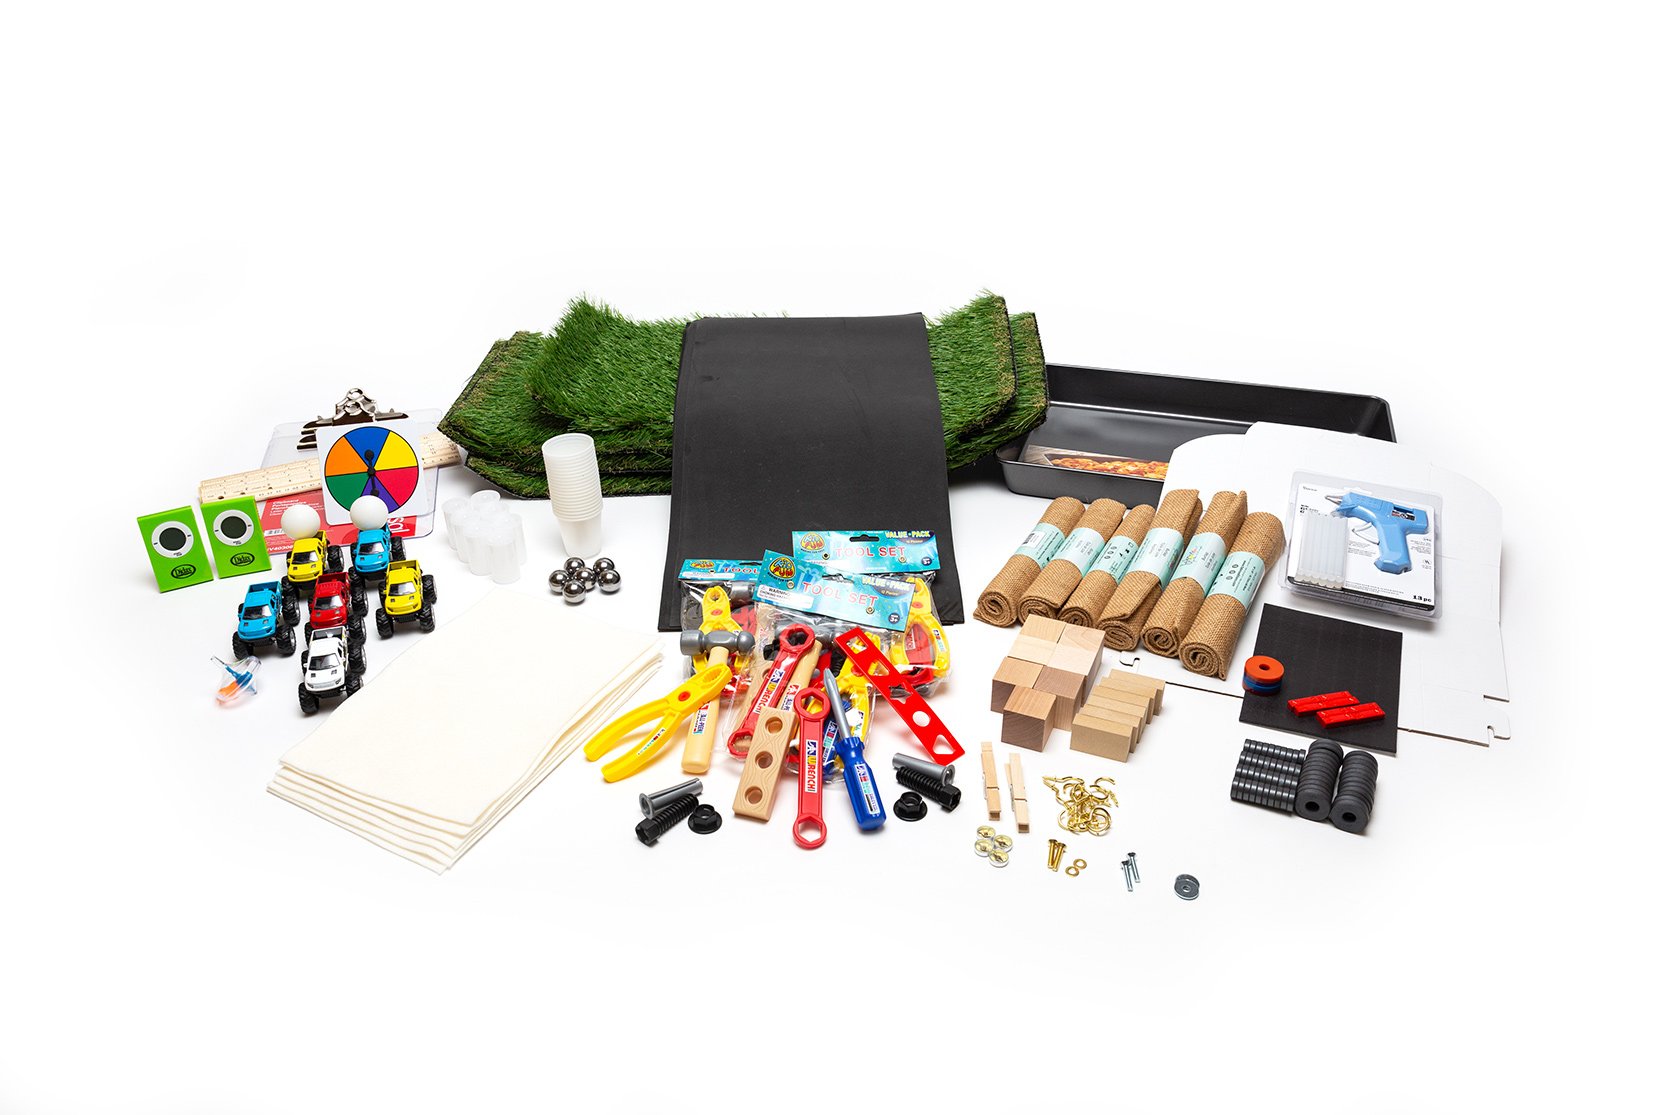 PhD Science hands-on materials kit from Level 3 Module 4 that includes burlap, artificial grass, a game spinner, and toy cars